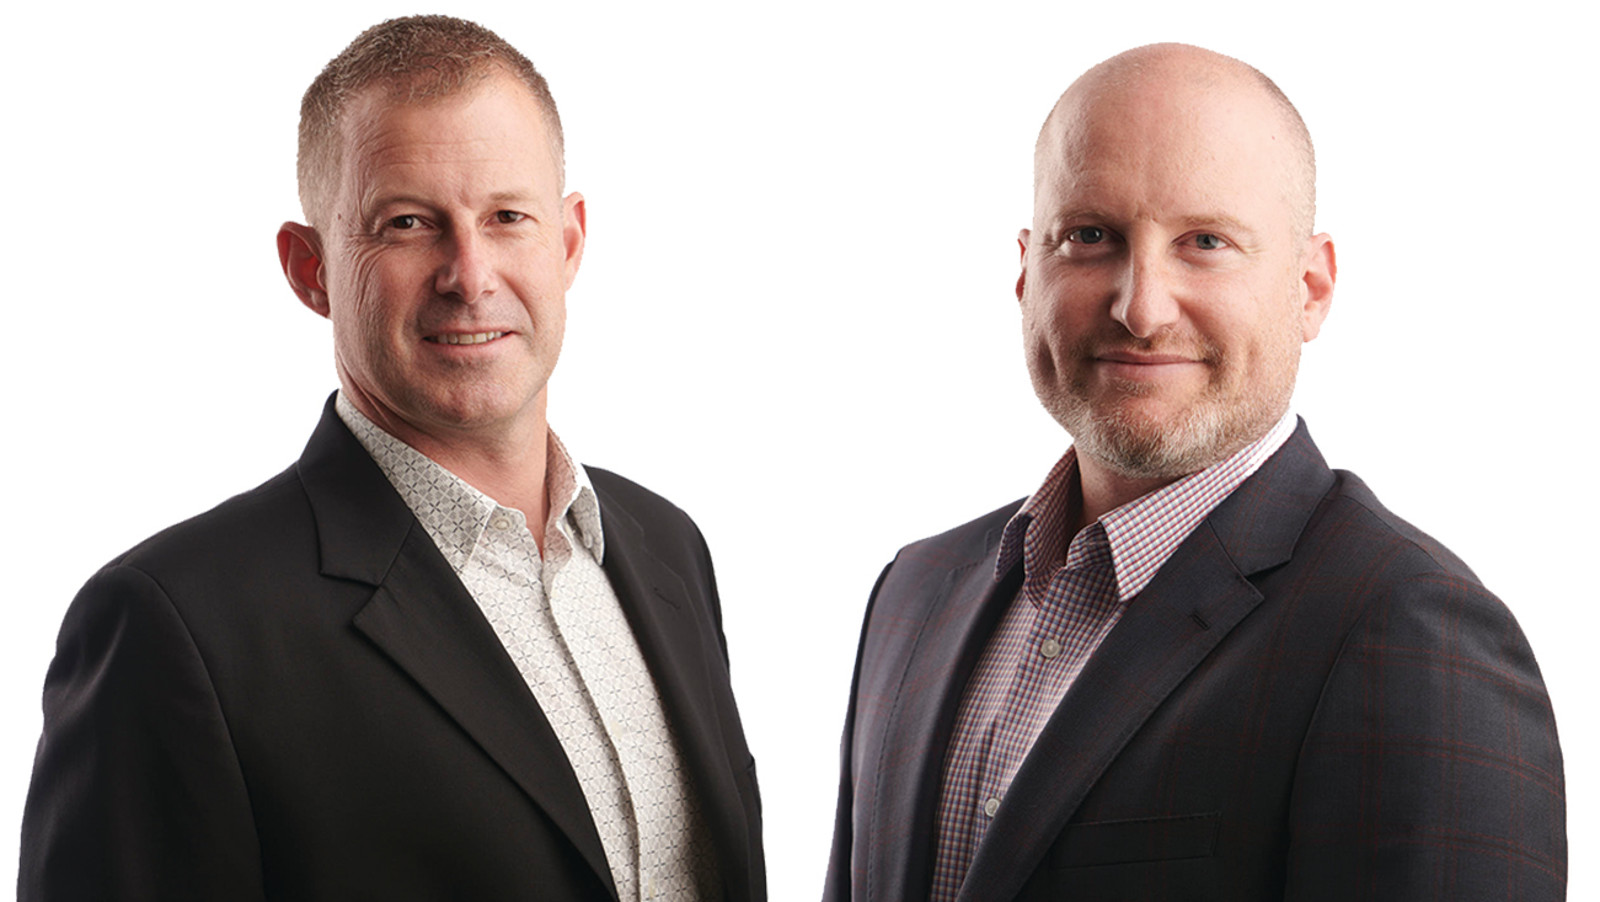 Featured image, left to right: Centbee CEOs Angus Brown and Lorien Gamaroff (Supplied)